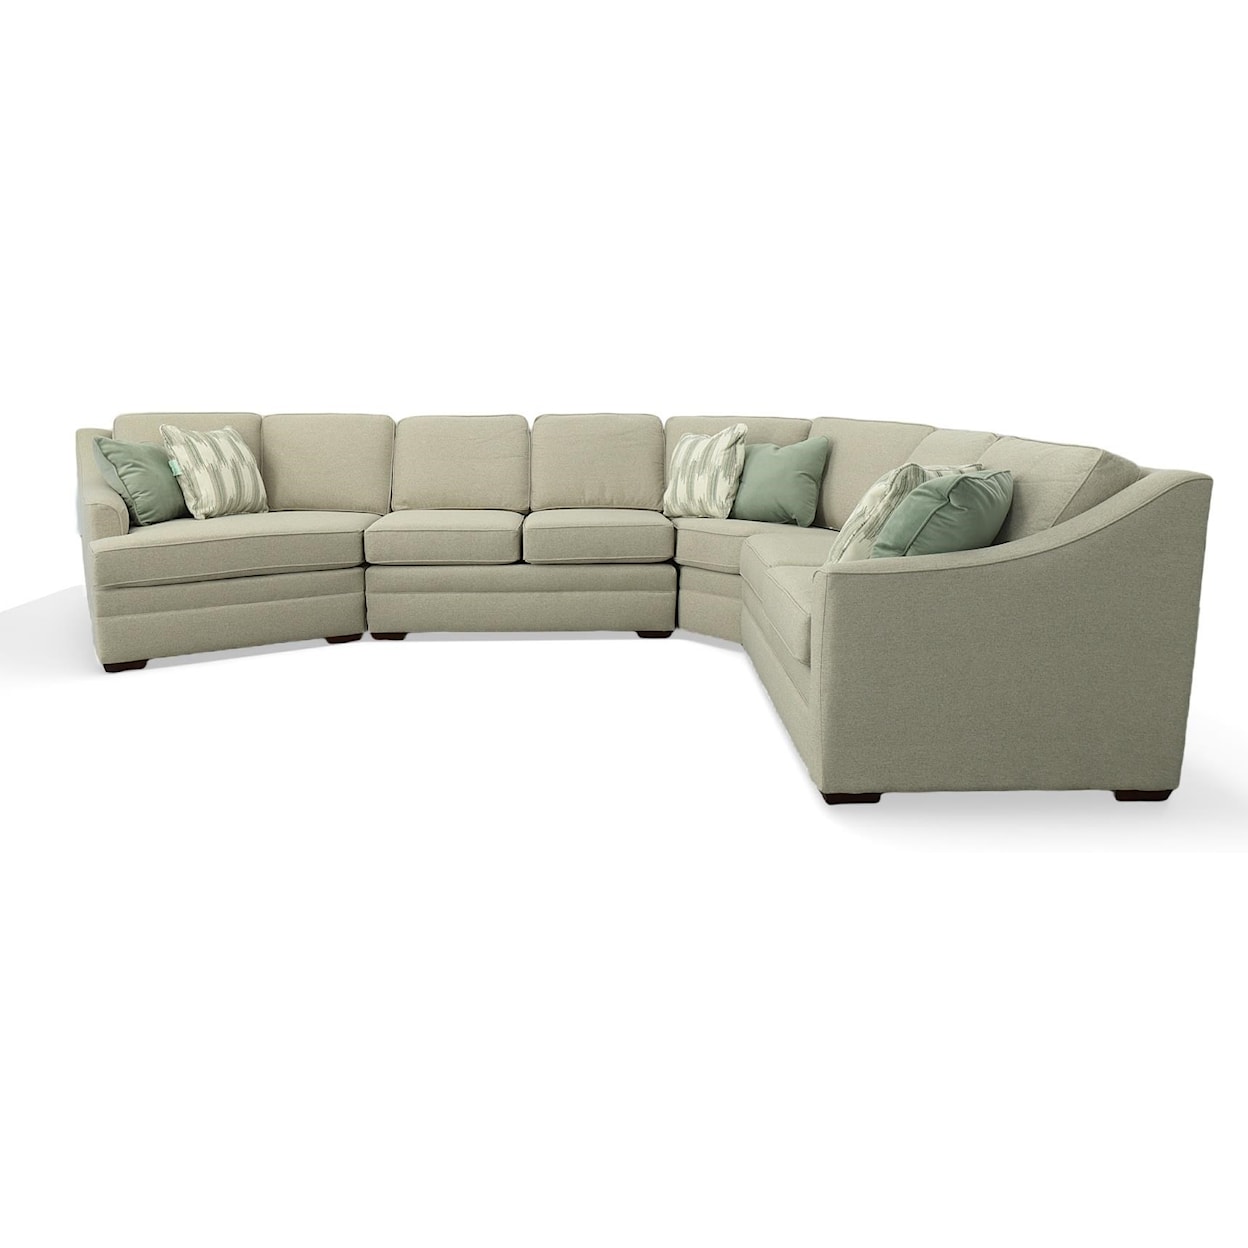 England 4T00 Series 4 Piece Sectional